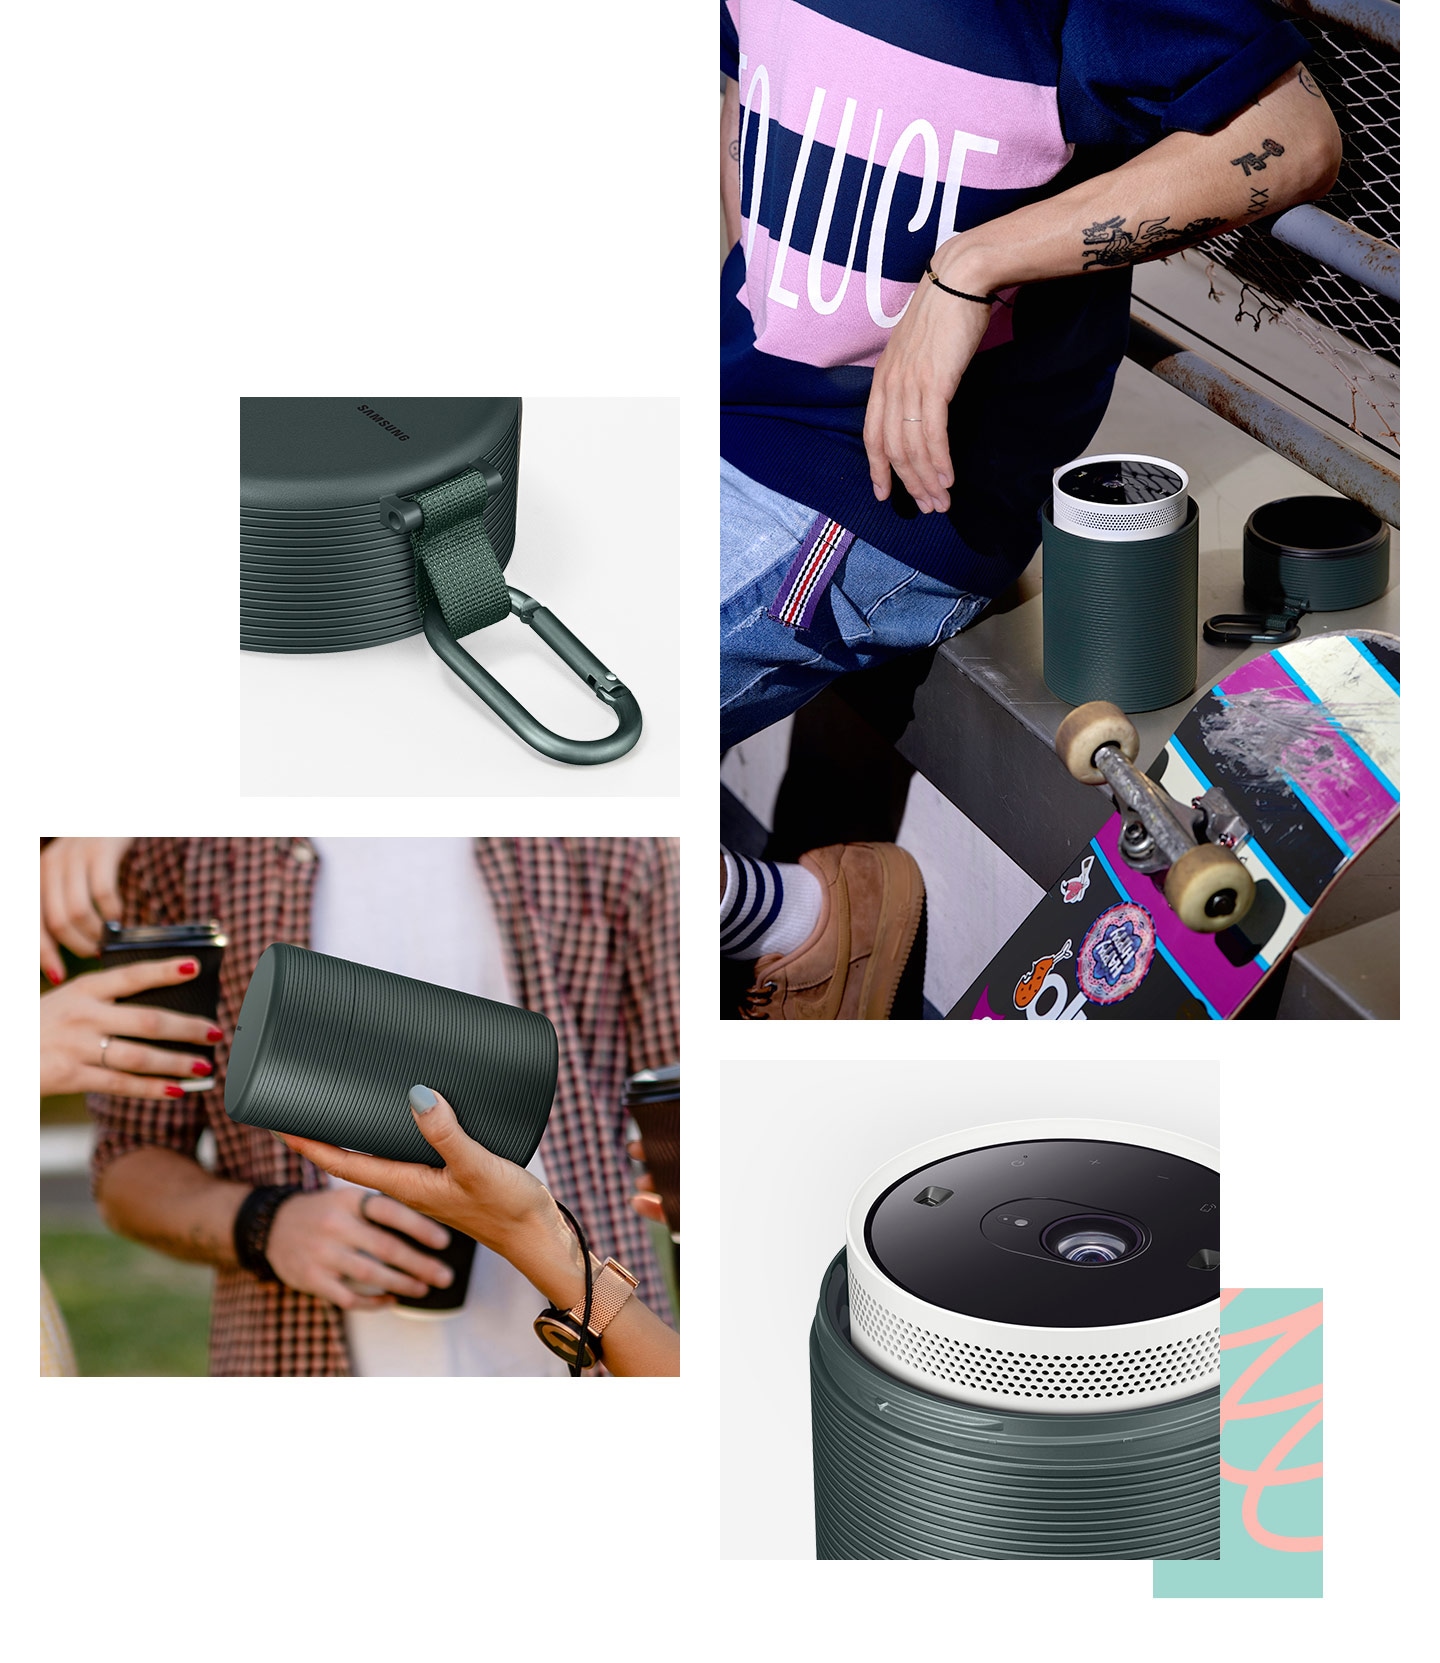 The cap of the Freestyle's case is displayed, and a closeup of the Freestyle inside the case without the cap on is showed. And, A tattooed man is leaning next to the Freestyle with his skateboard. Also, A woman is holding the encased Freestyle with a man in the background.